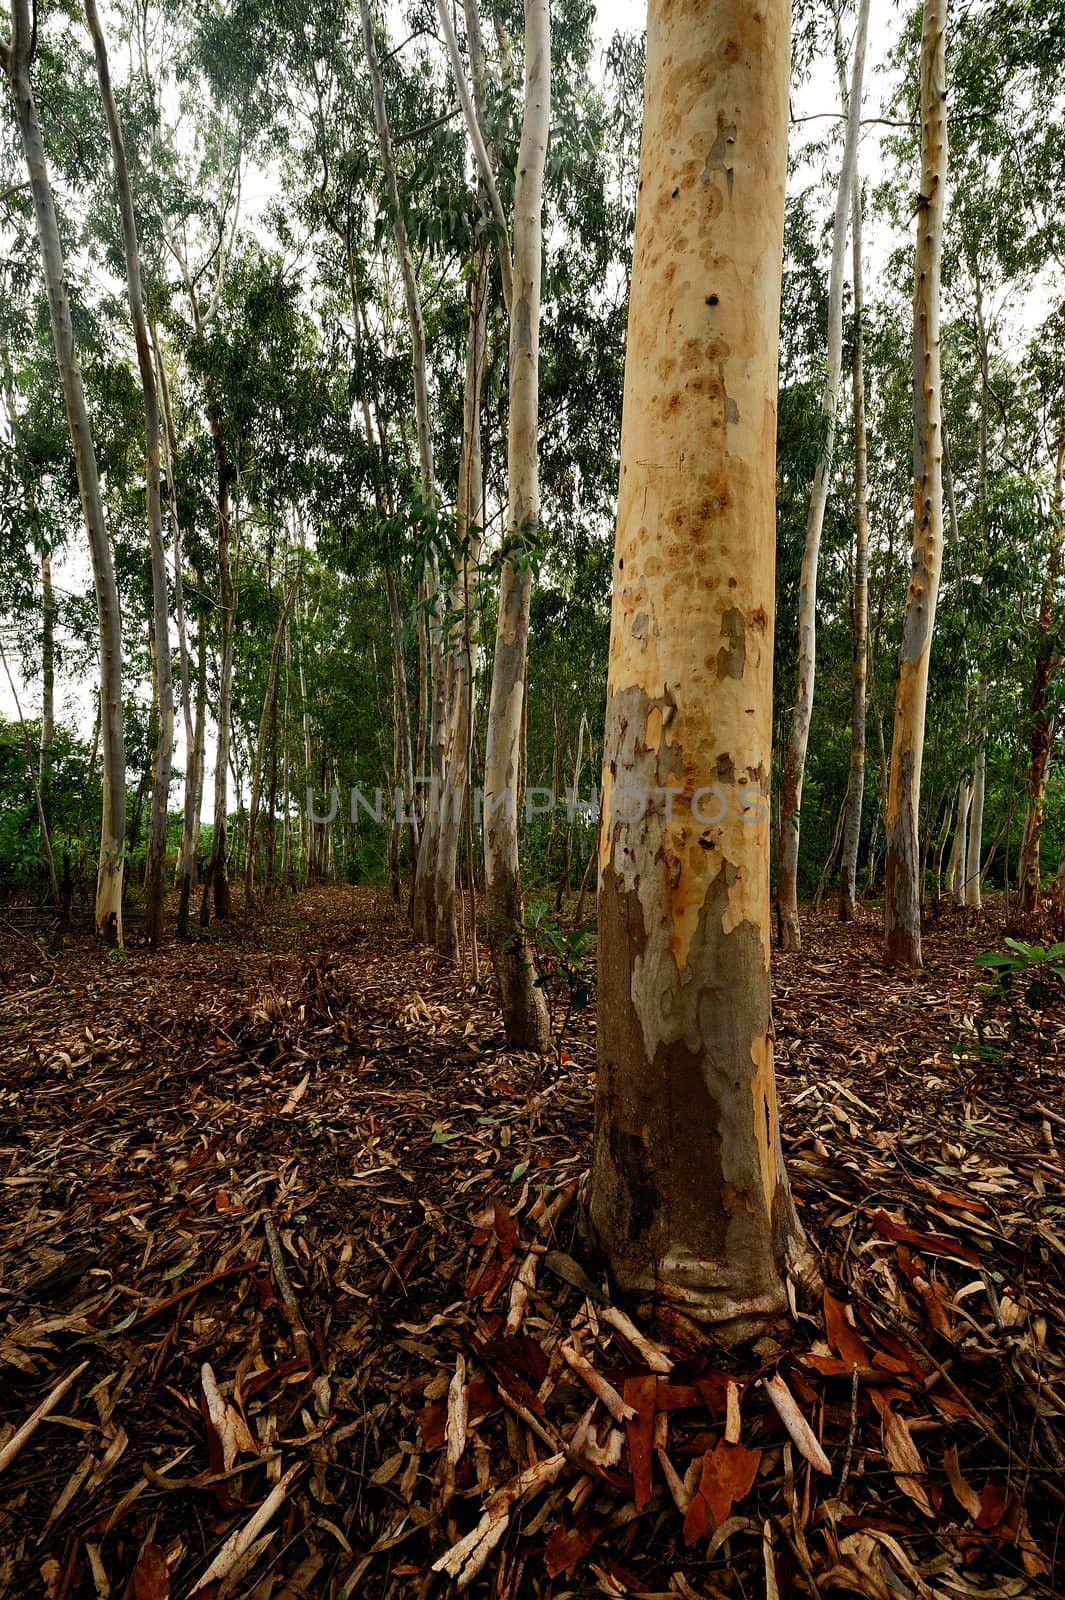 Plantation of Eucalyptus tree for paper industry by think4photop